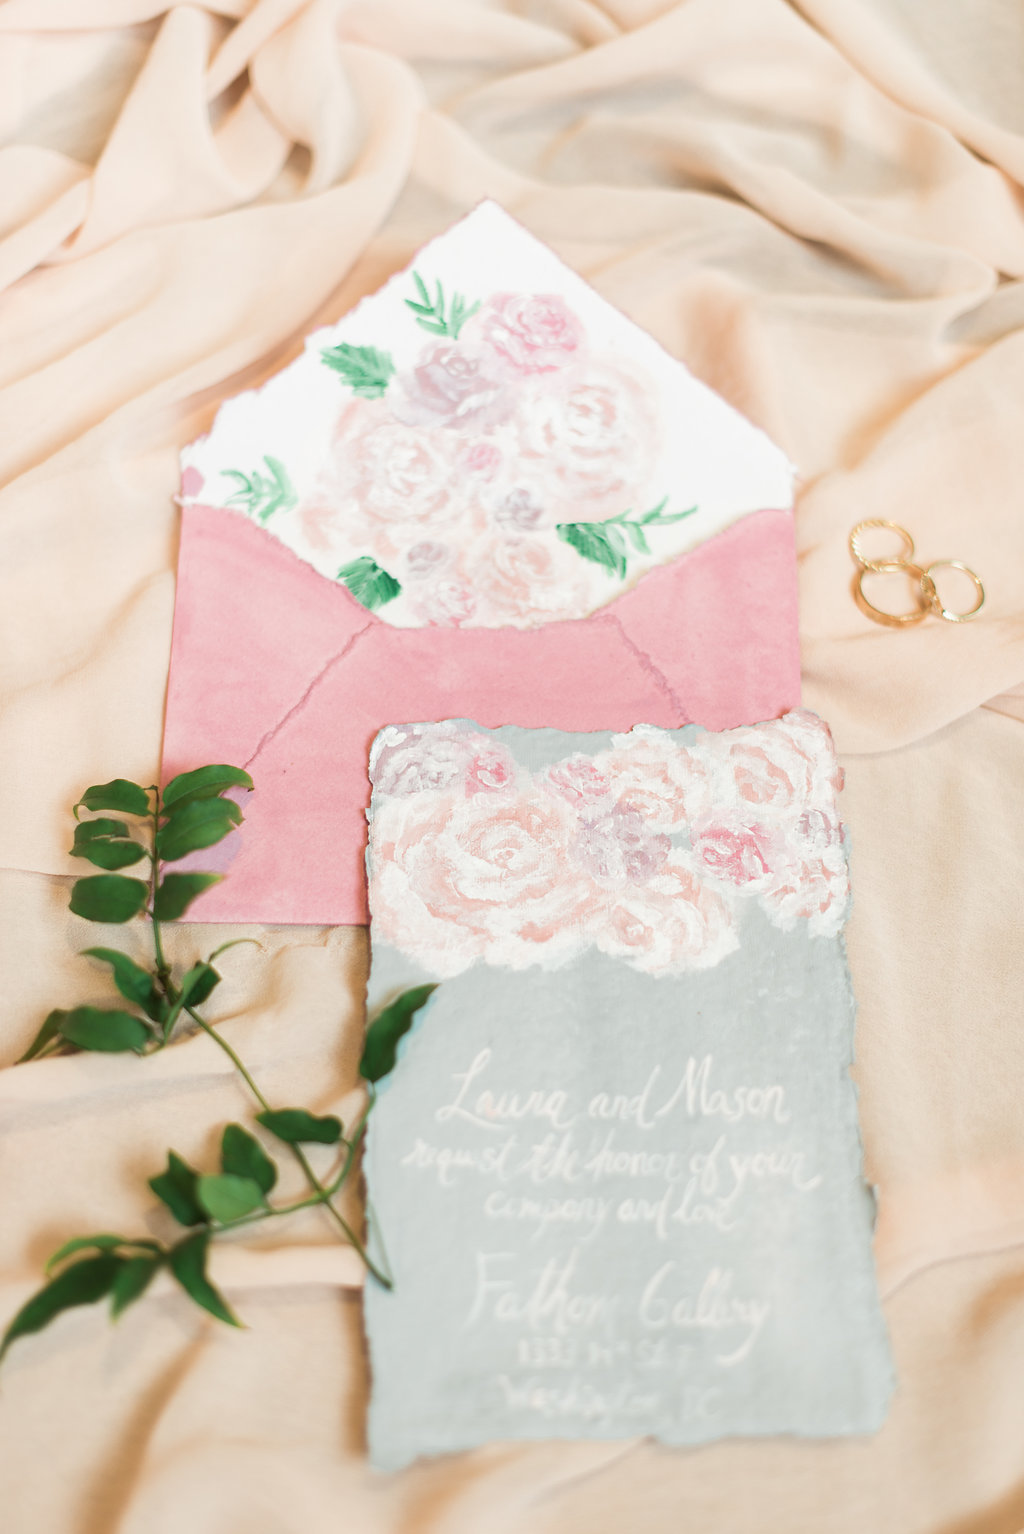 Floral themed wedding invitations